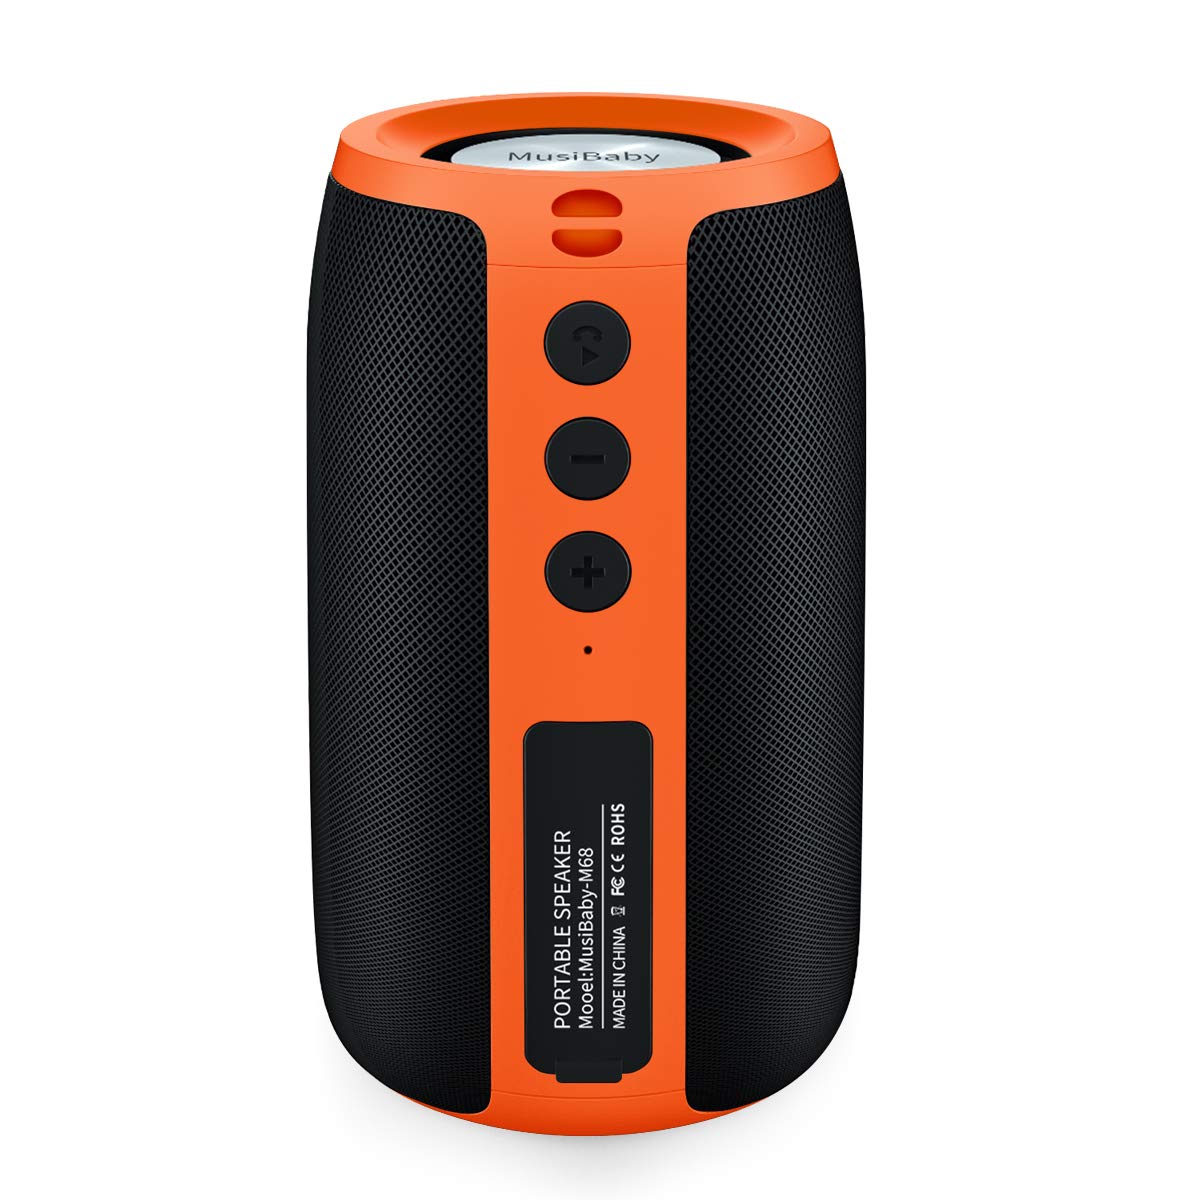  Visit the MusiBady Store Bluetooth Speakers,MusiBaby Speakers Bluetooth Wireless,Portable,Waterproof,Loud Stereo,Booming Bass,Dual Pairing,Bluetooth 5.0,24H Playtime,Speaker for Home,Party,Outdoor,Gifts...